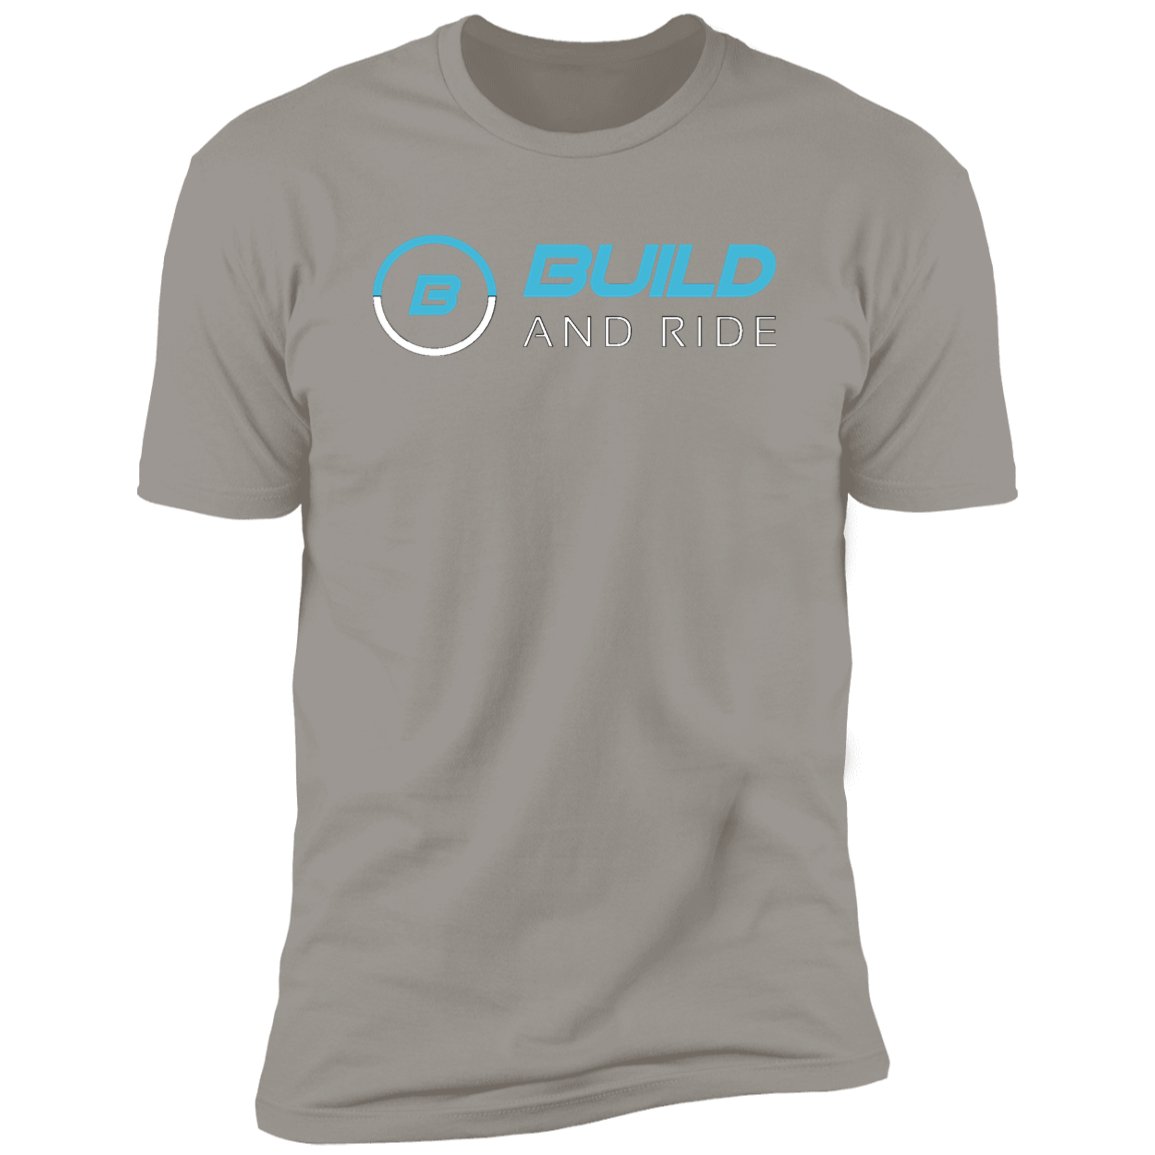 Build And Ride 2 T-Shirt - Build And Ride